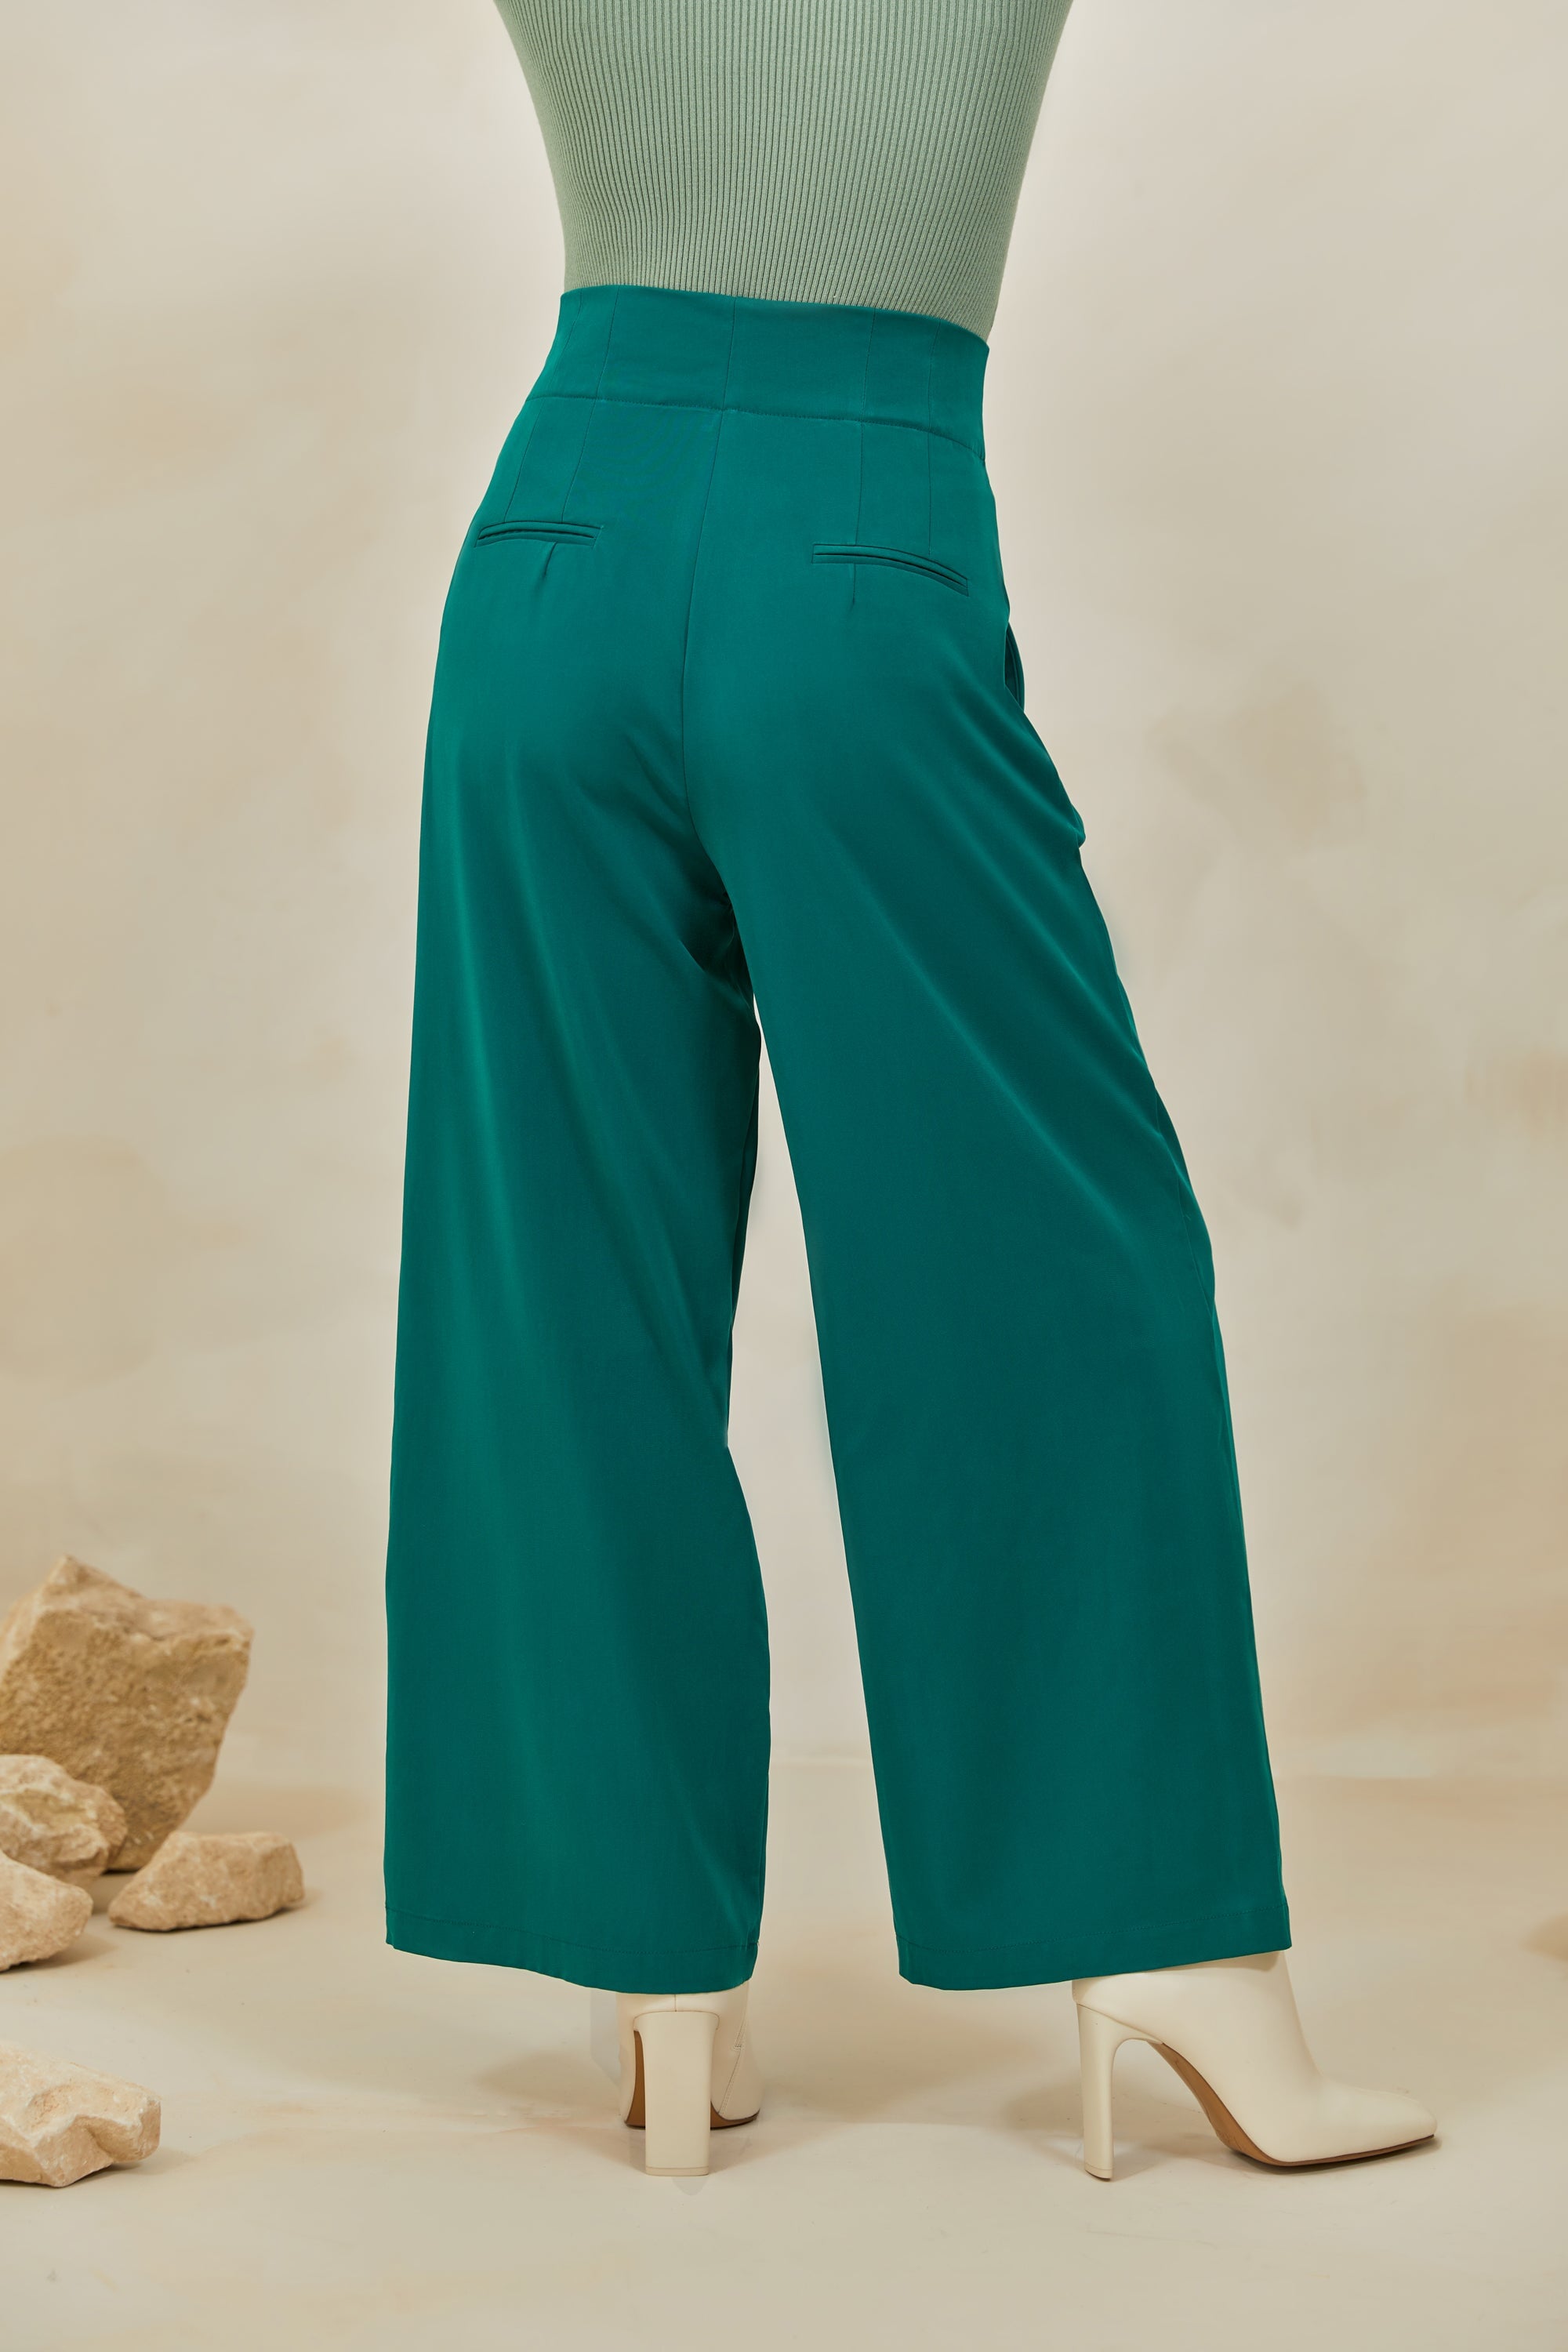 Alexia High Rise Trousers - Jade Veiled Collection 